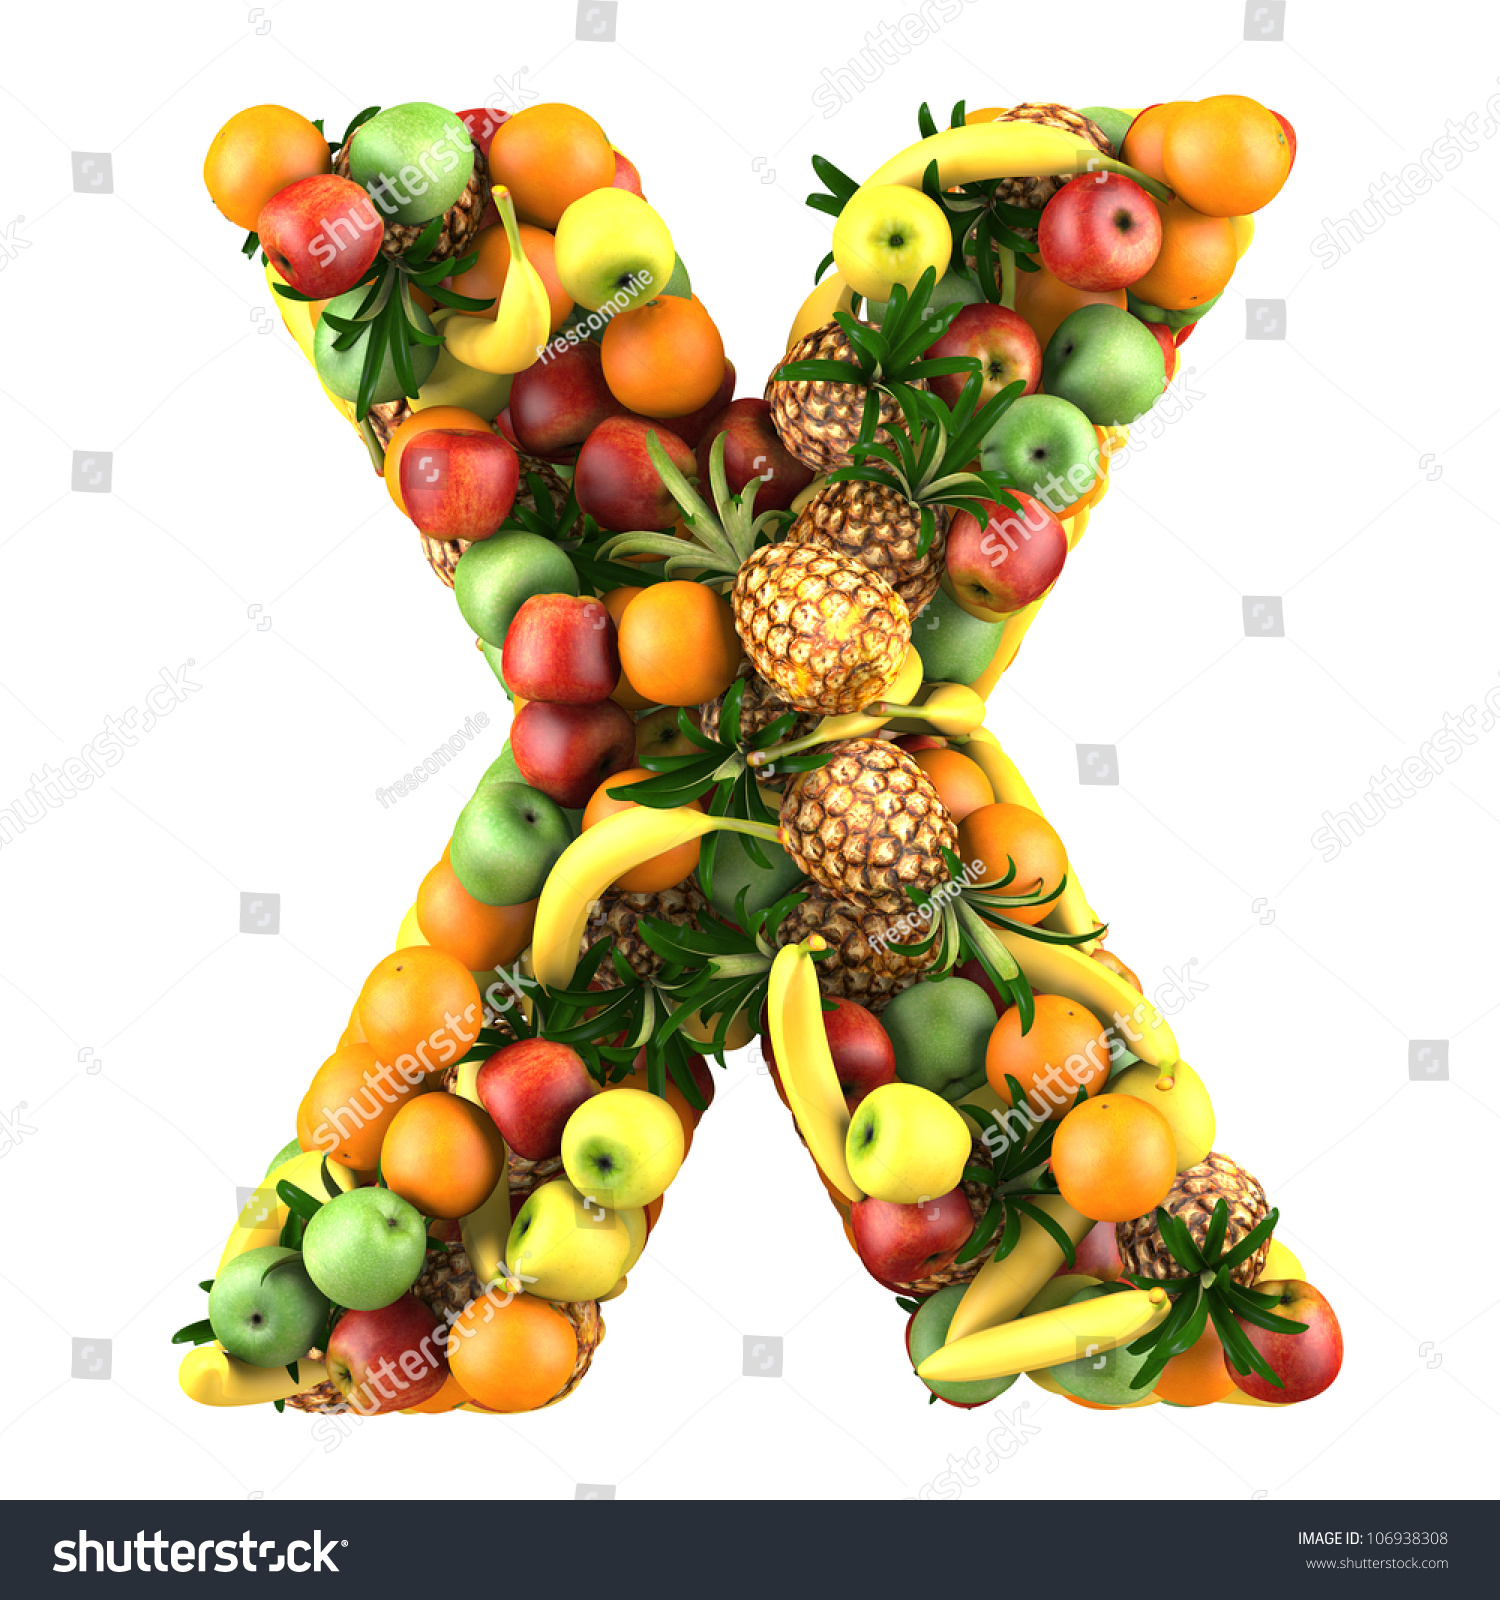 What is a food that starts with the letter X?